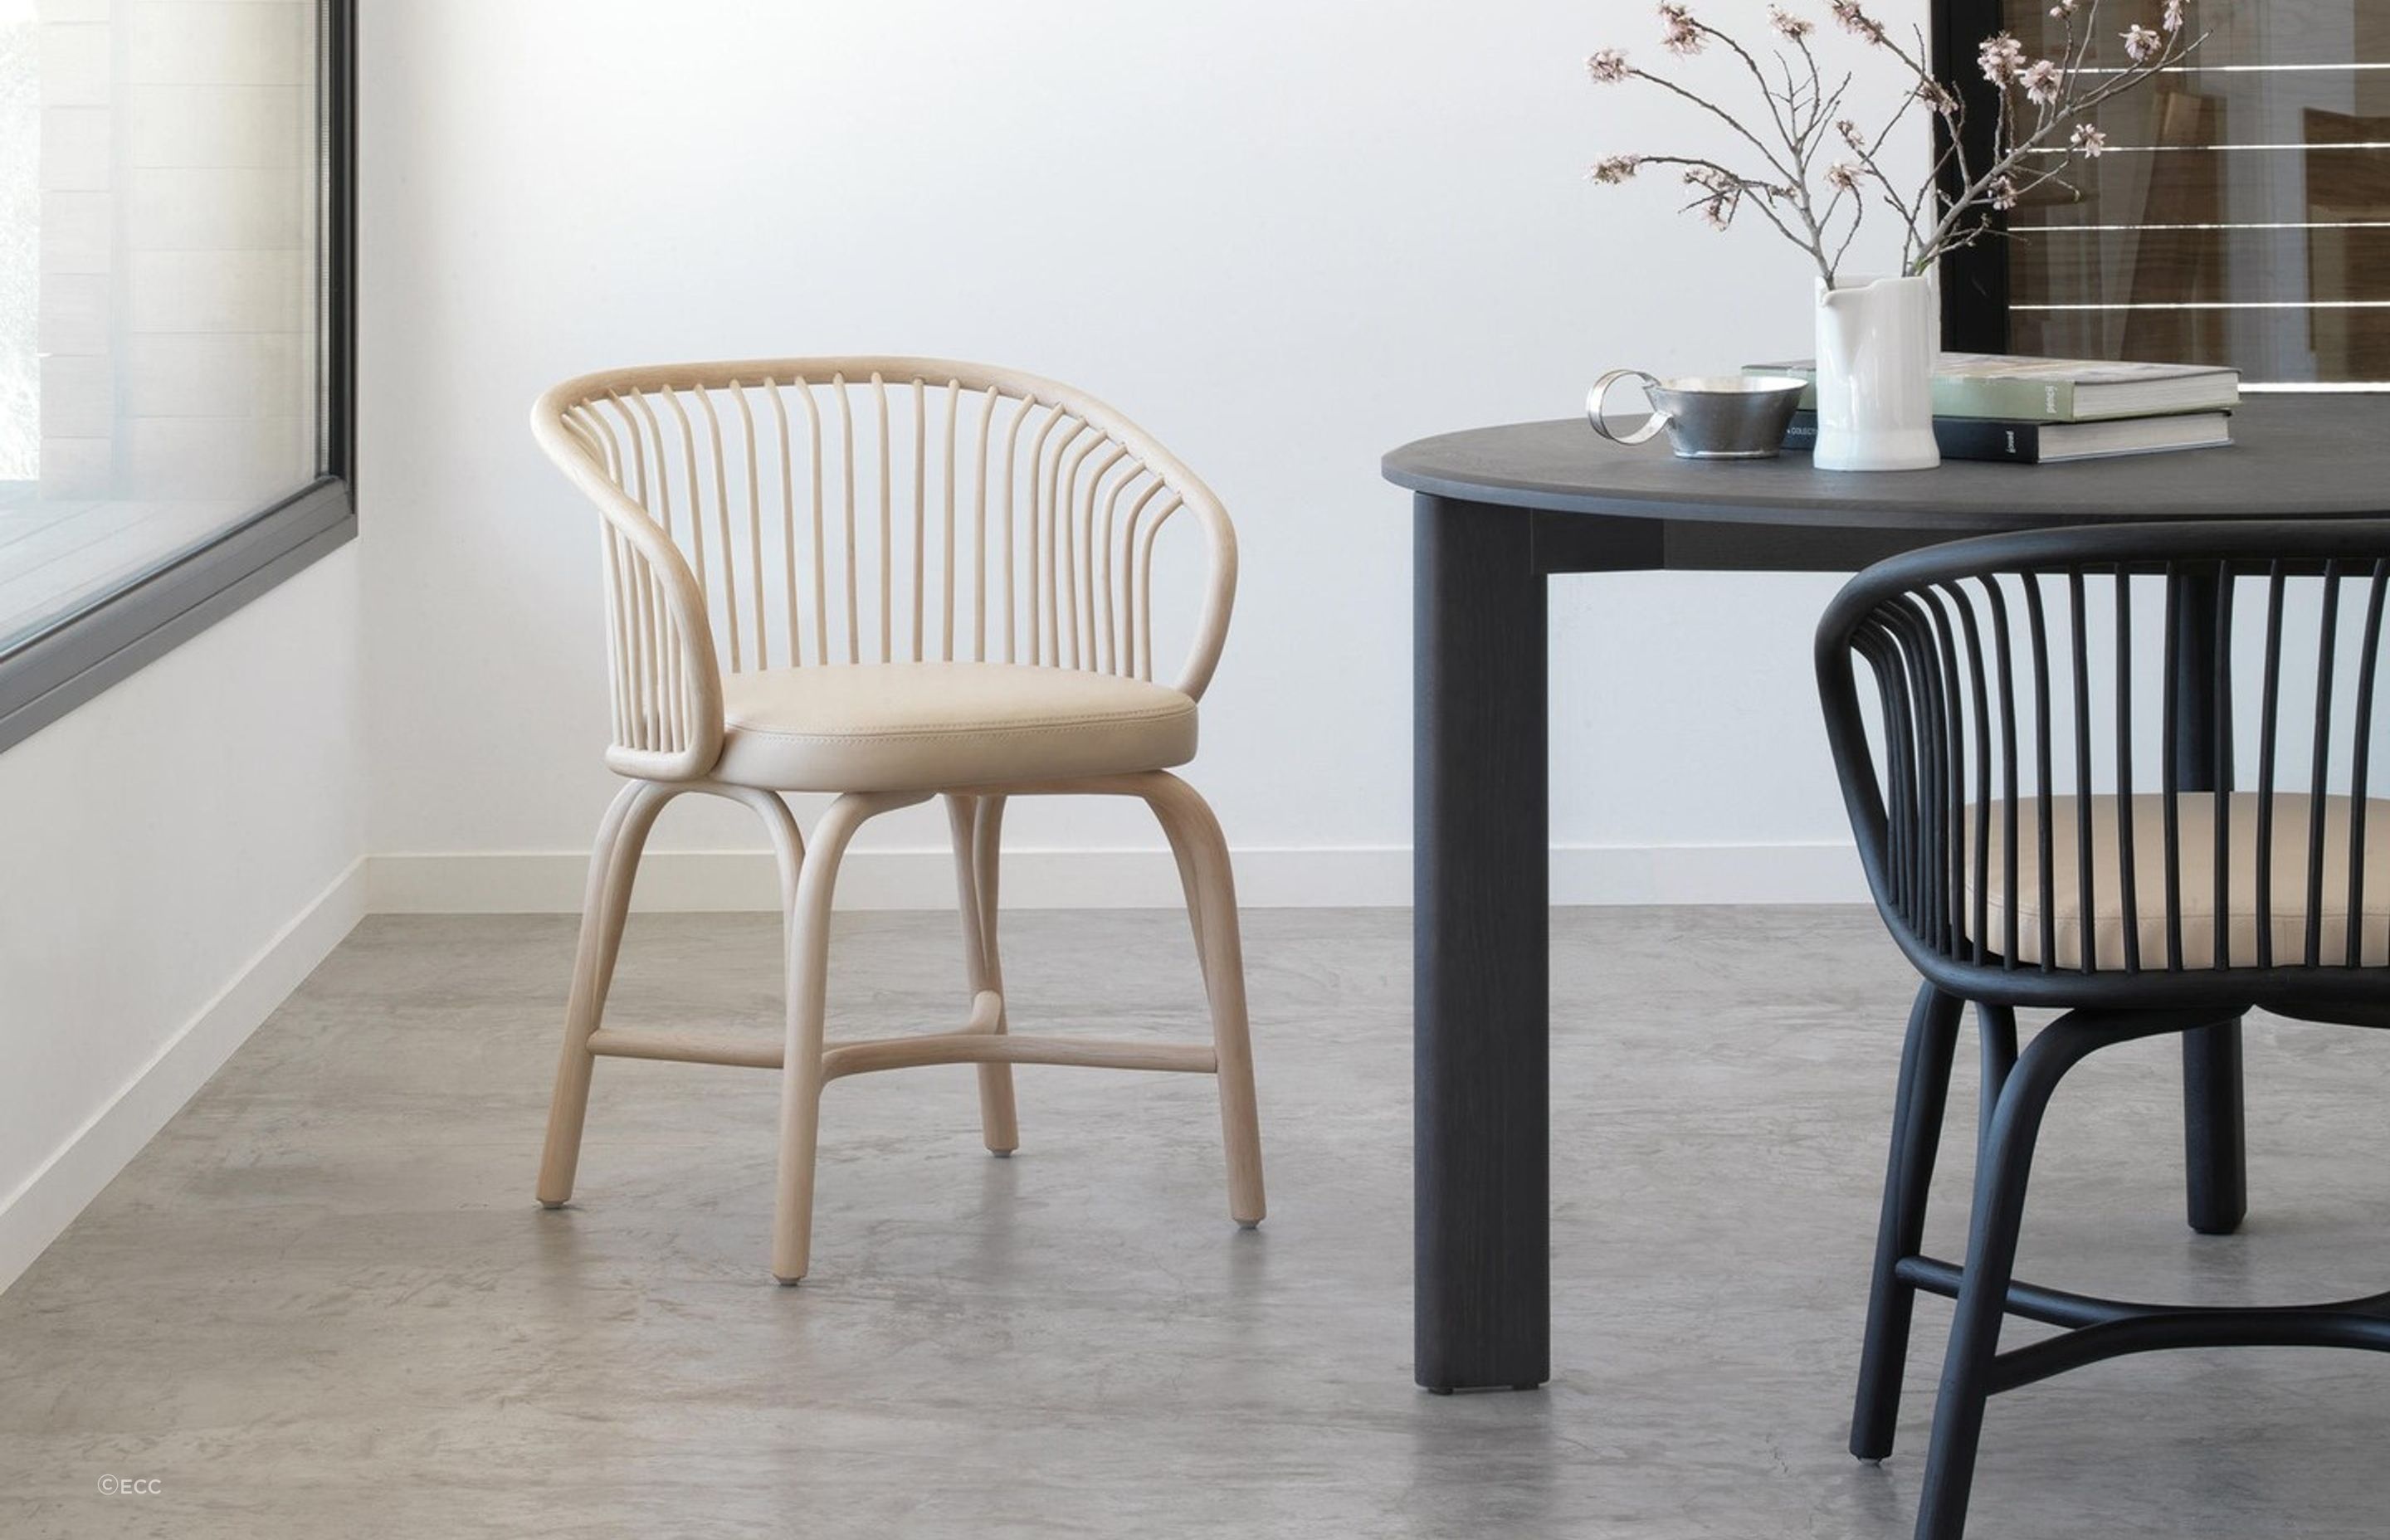 This Huma Chair by Expormim, features a flexible ribs in the curved backrest and an upholstered seat